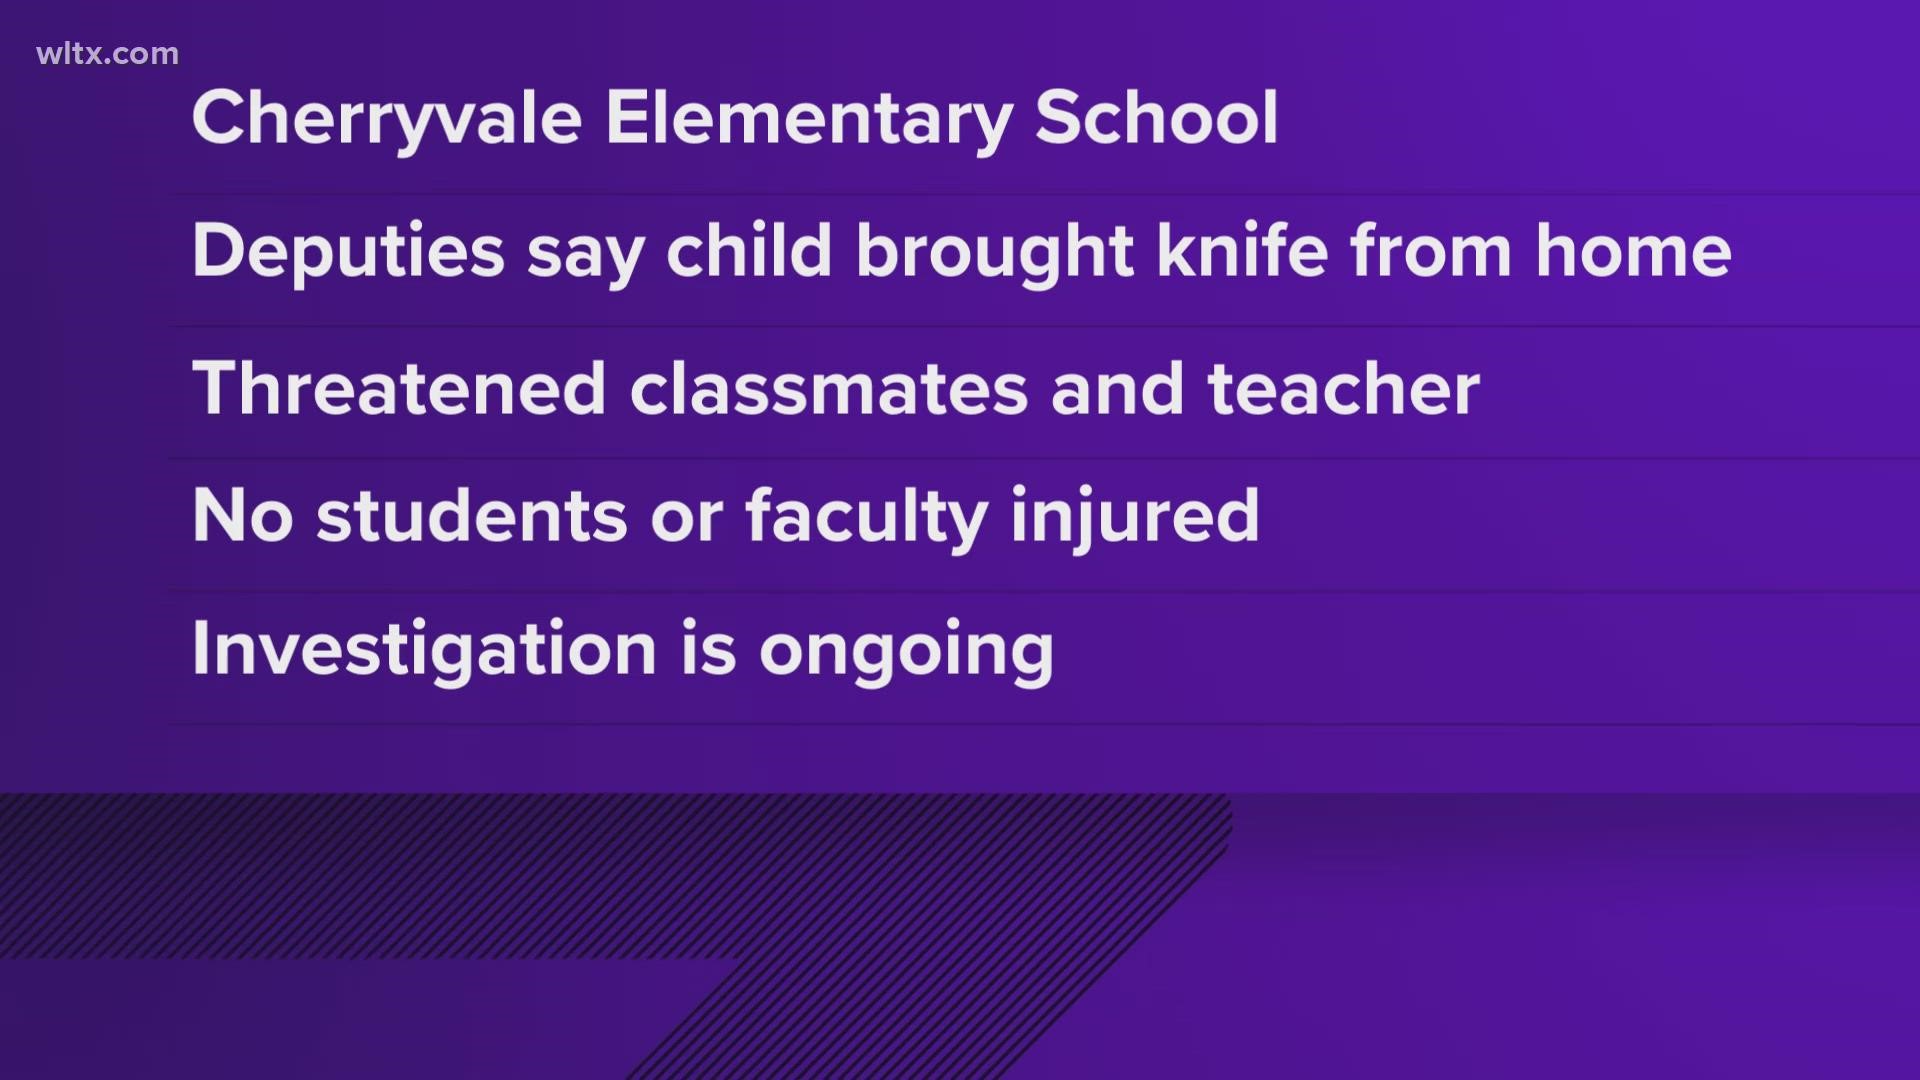 The incident happened at Cherryvale Elementary school.